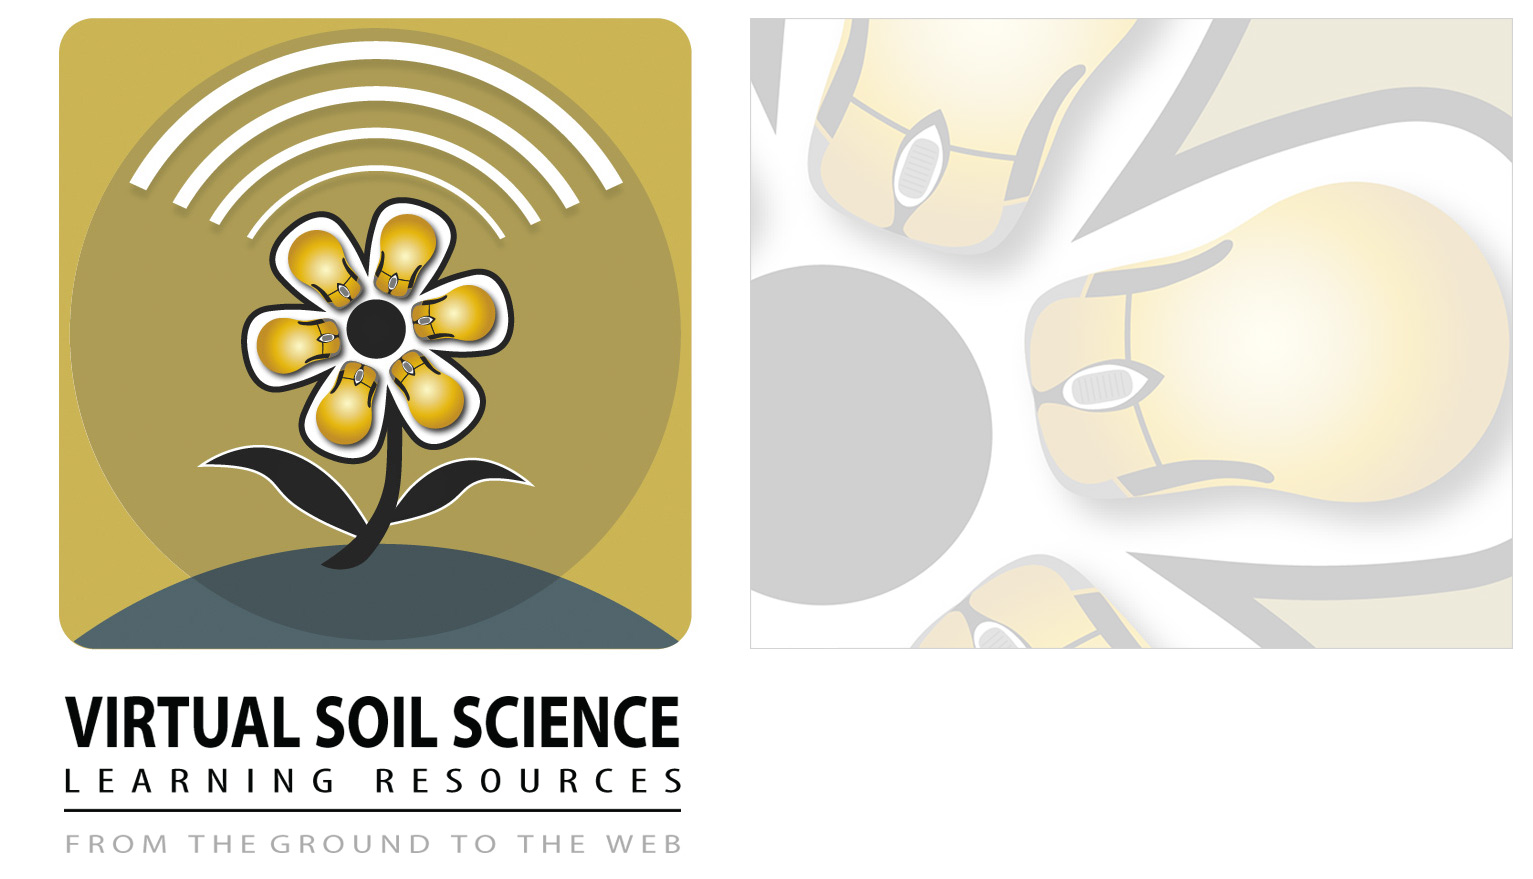 Virtual Soil Science logo. "From the ground to the web". Visit www.soilweb.ca 